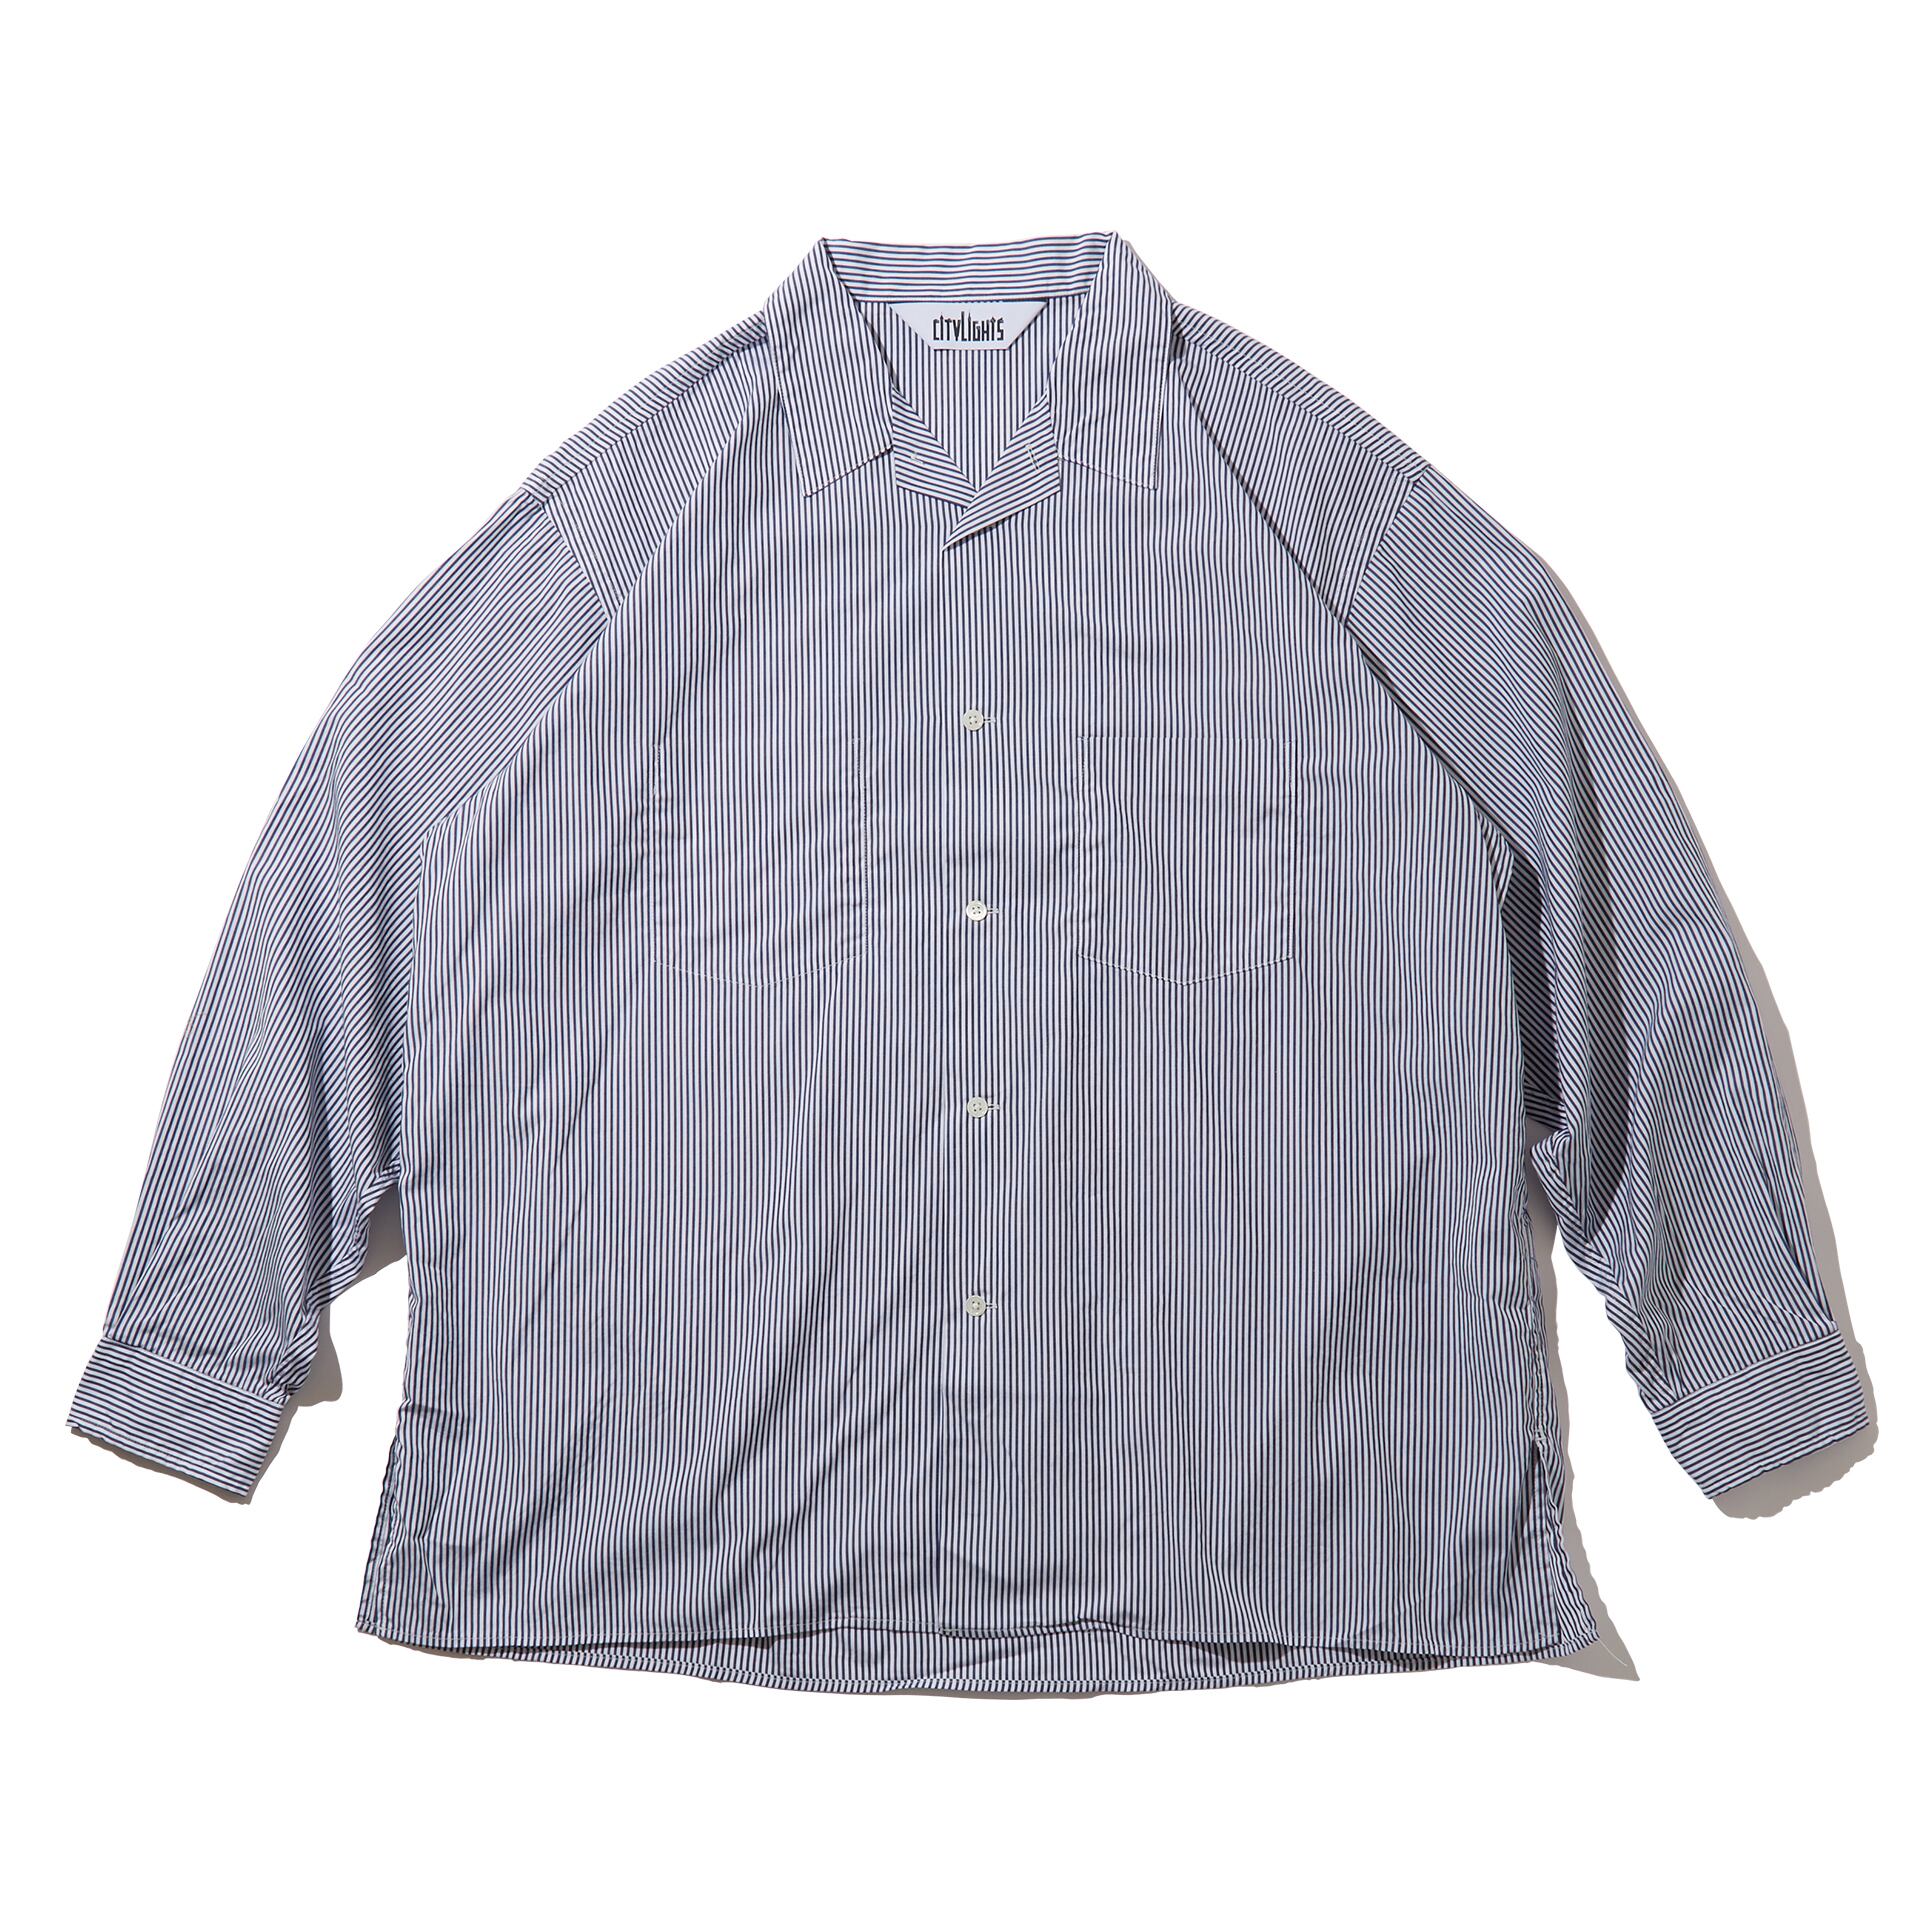 Name:DULL COLLAR SHIRT | Color:Navy Stlipe | Size:Regular/Tall 【CITYLIGHTS PRODUCTS_シティライツプロダクツ】